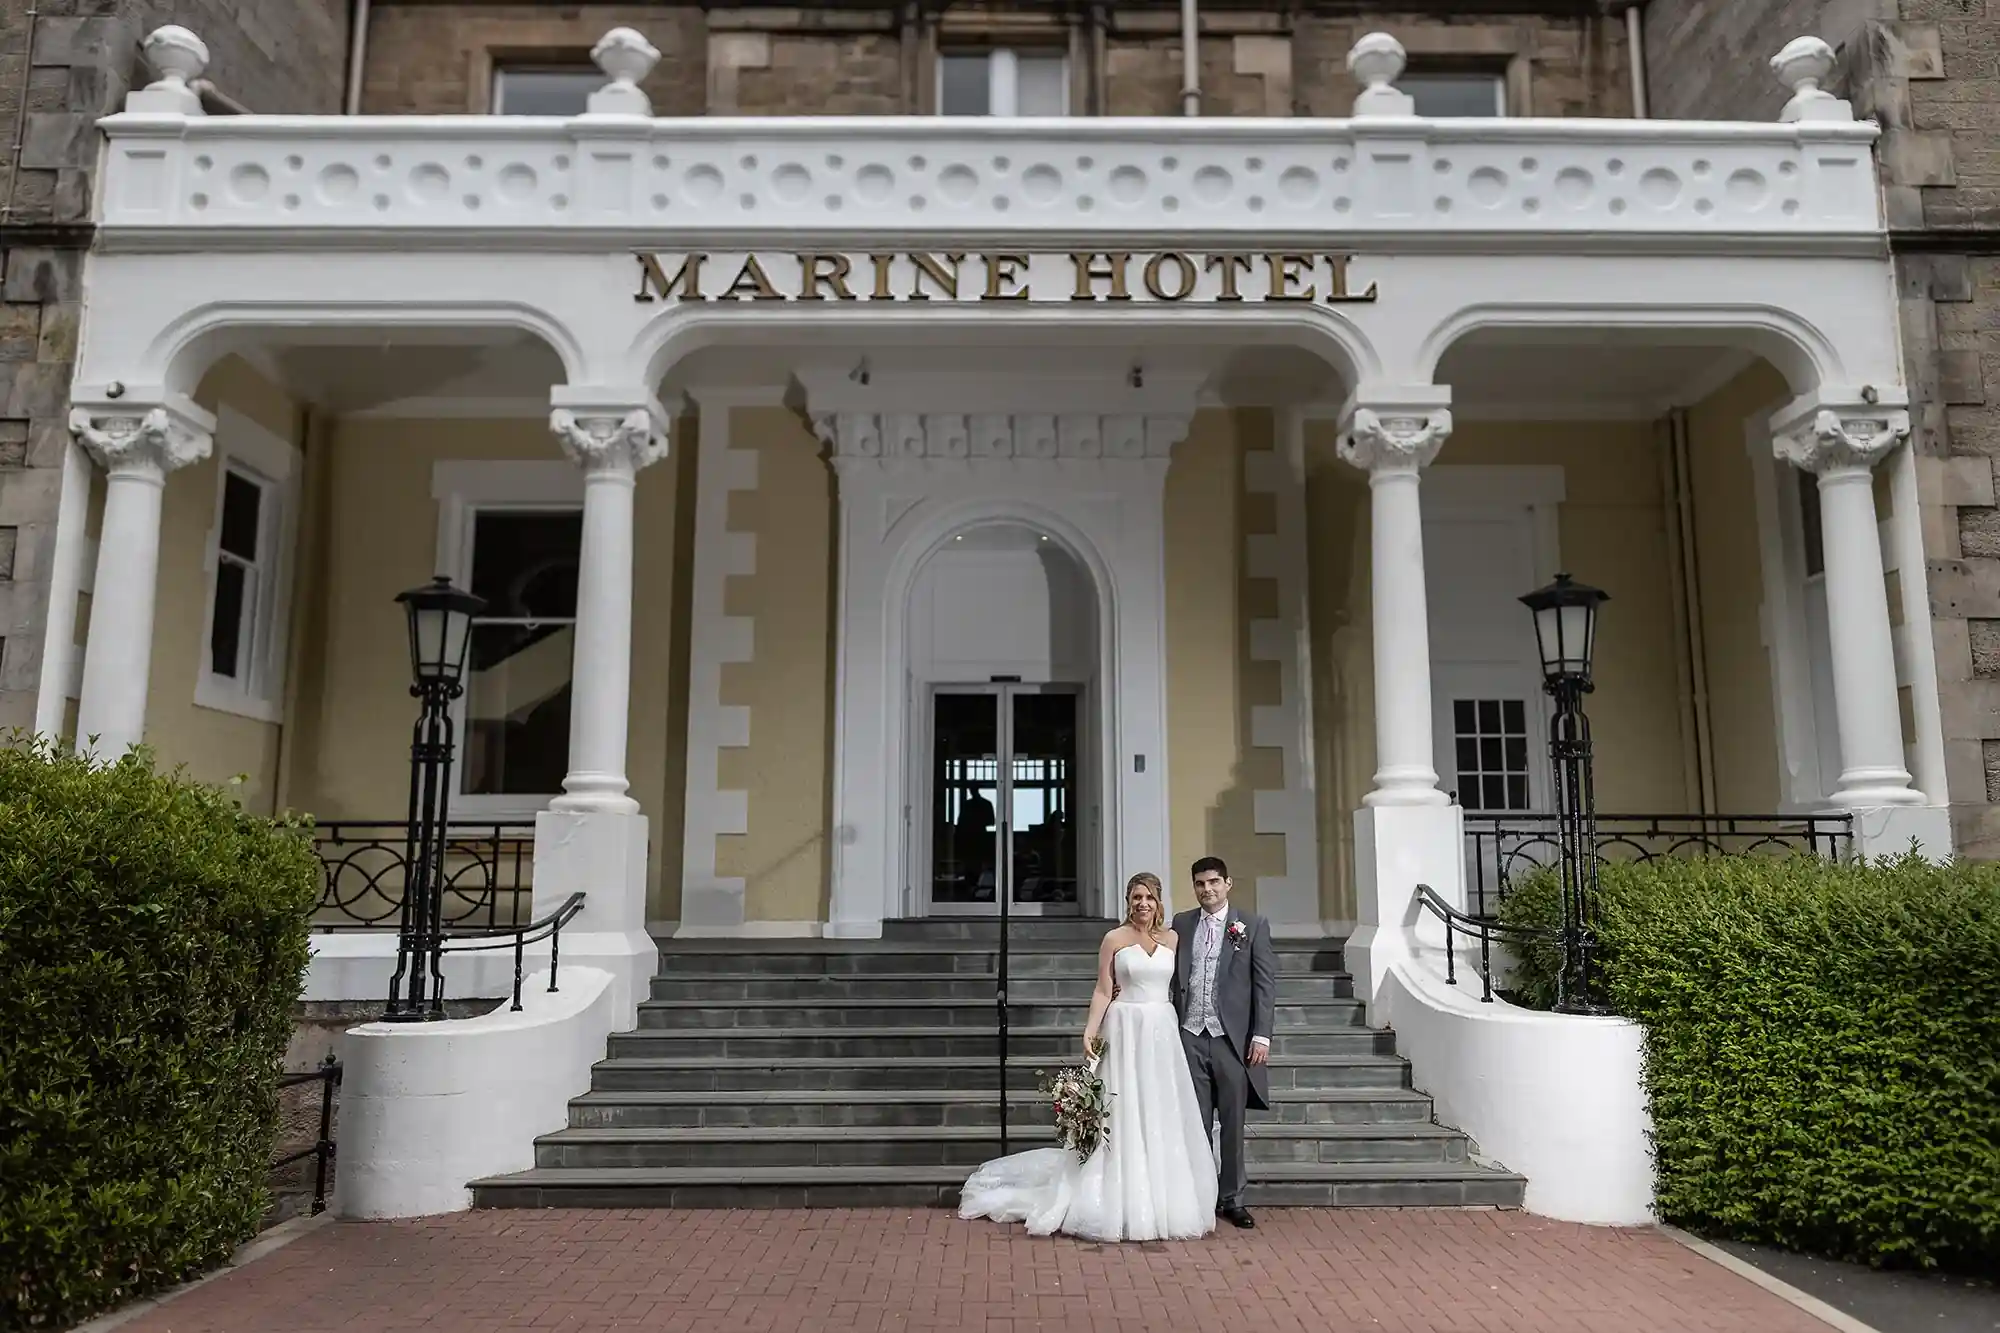 A newlywed couple standing on steps outside the marine hotel, with the groom in a suit and the bride in a white gown holding a bouquet.